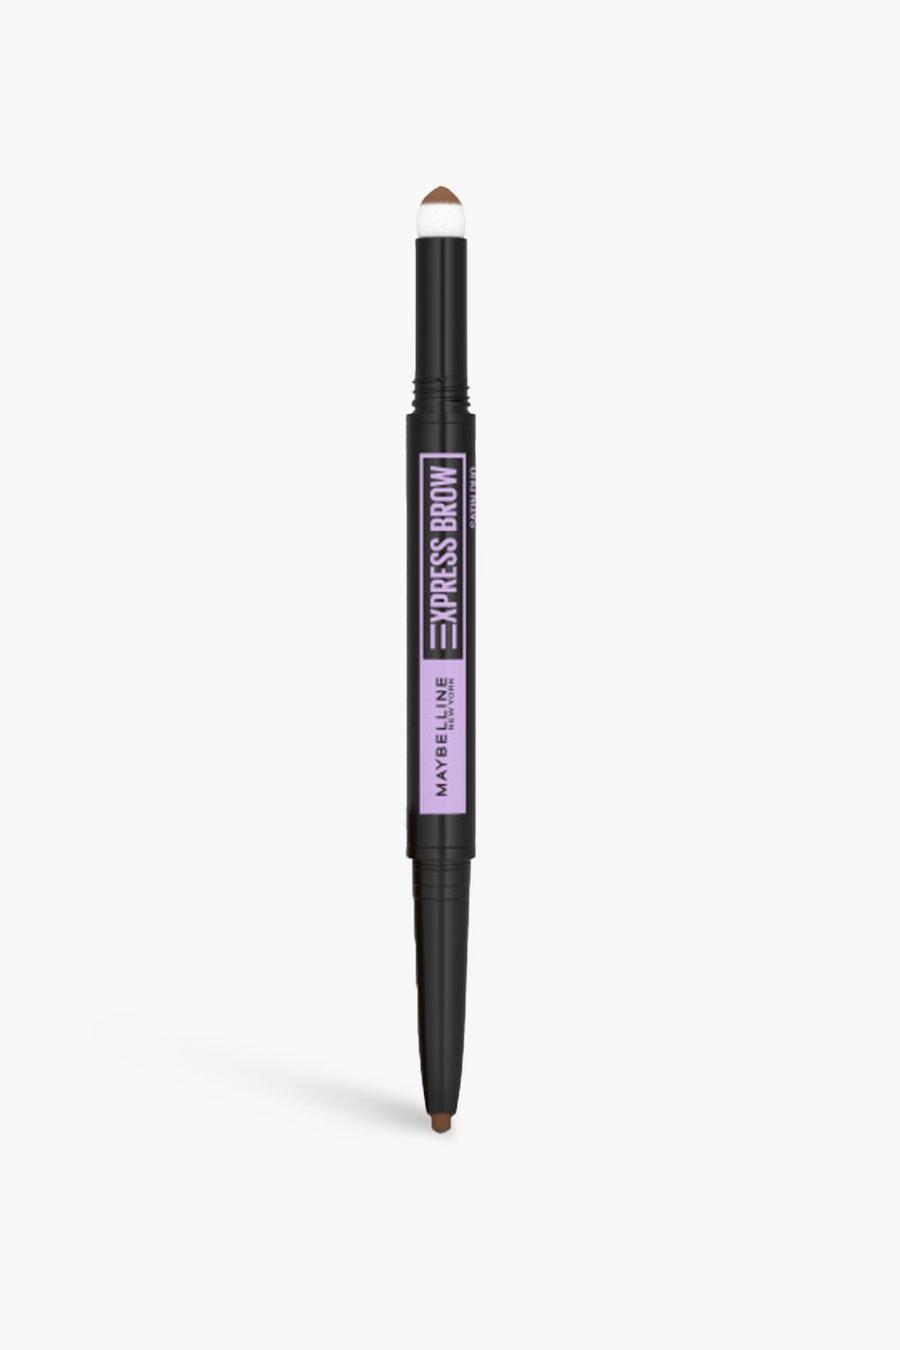 Maybelline - Crayon à sourcil - Express Brow Duo, 02 brunette image number 1